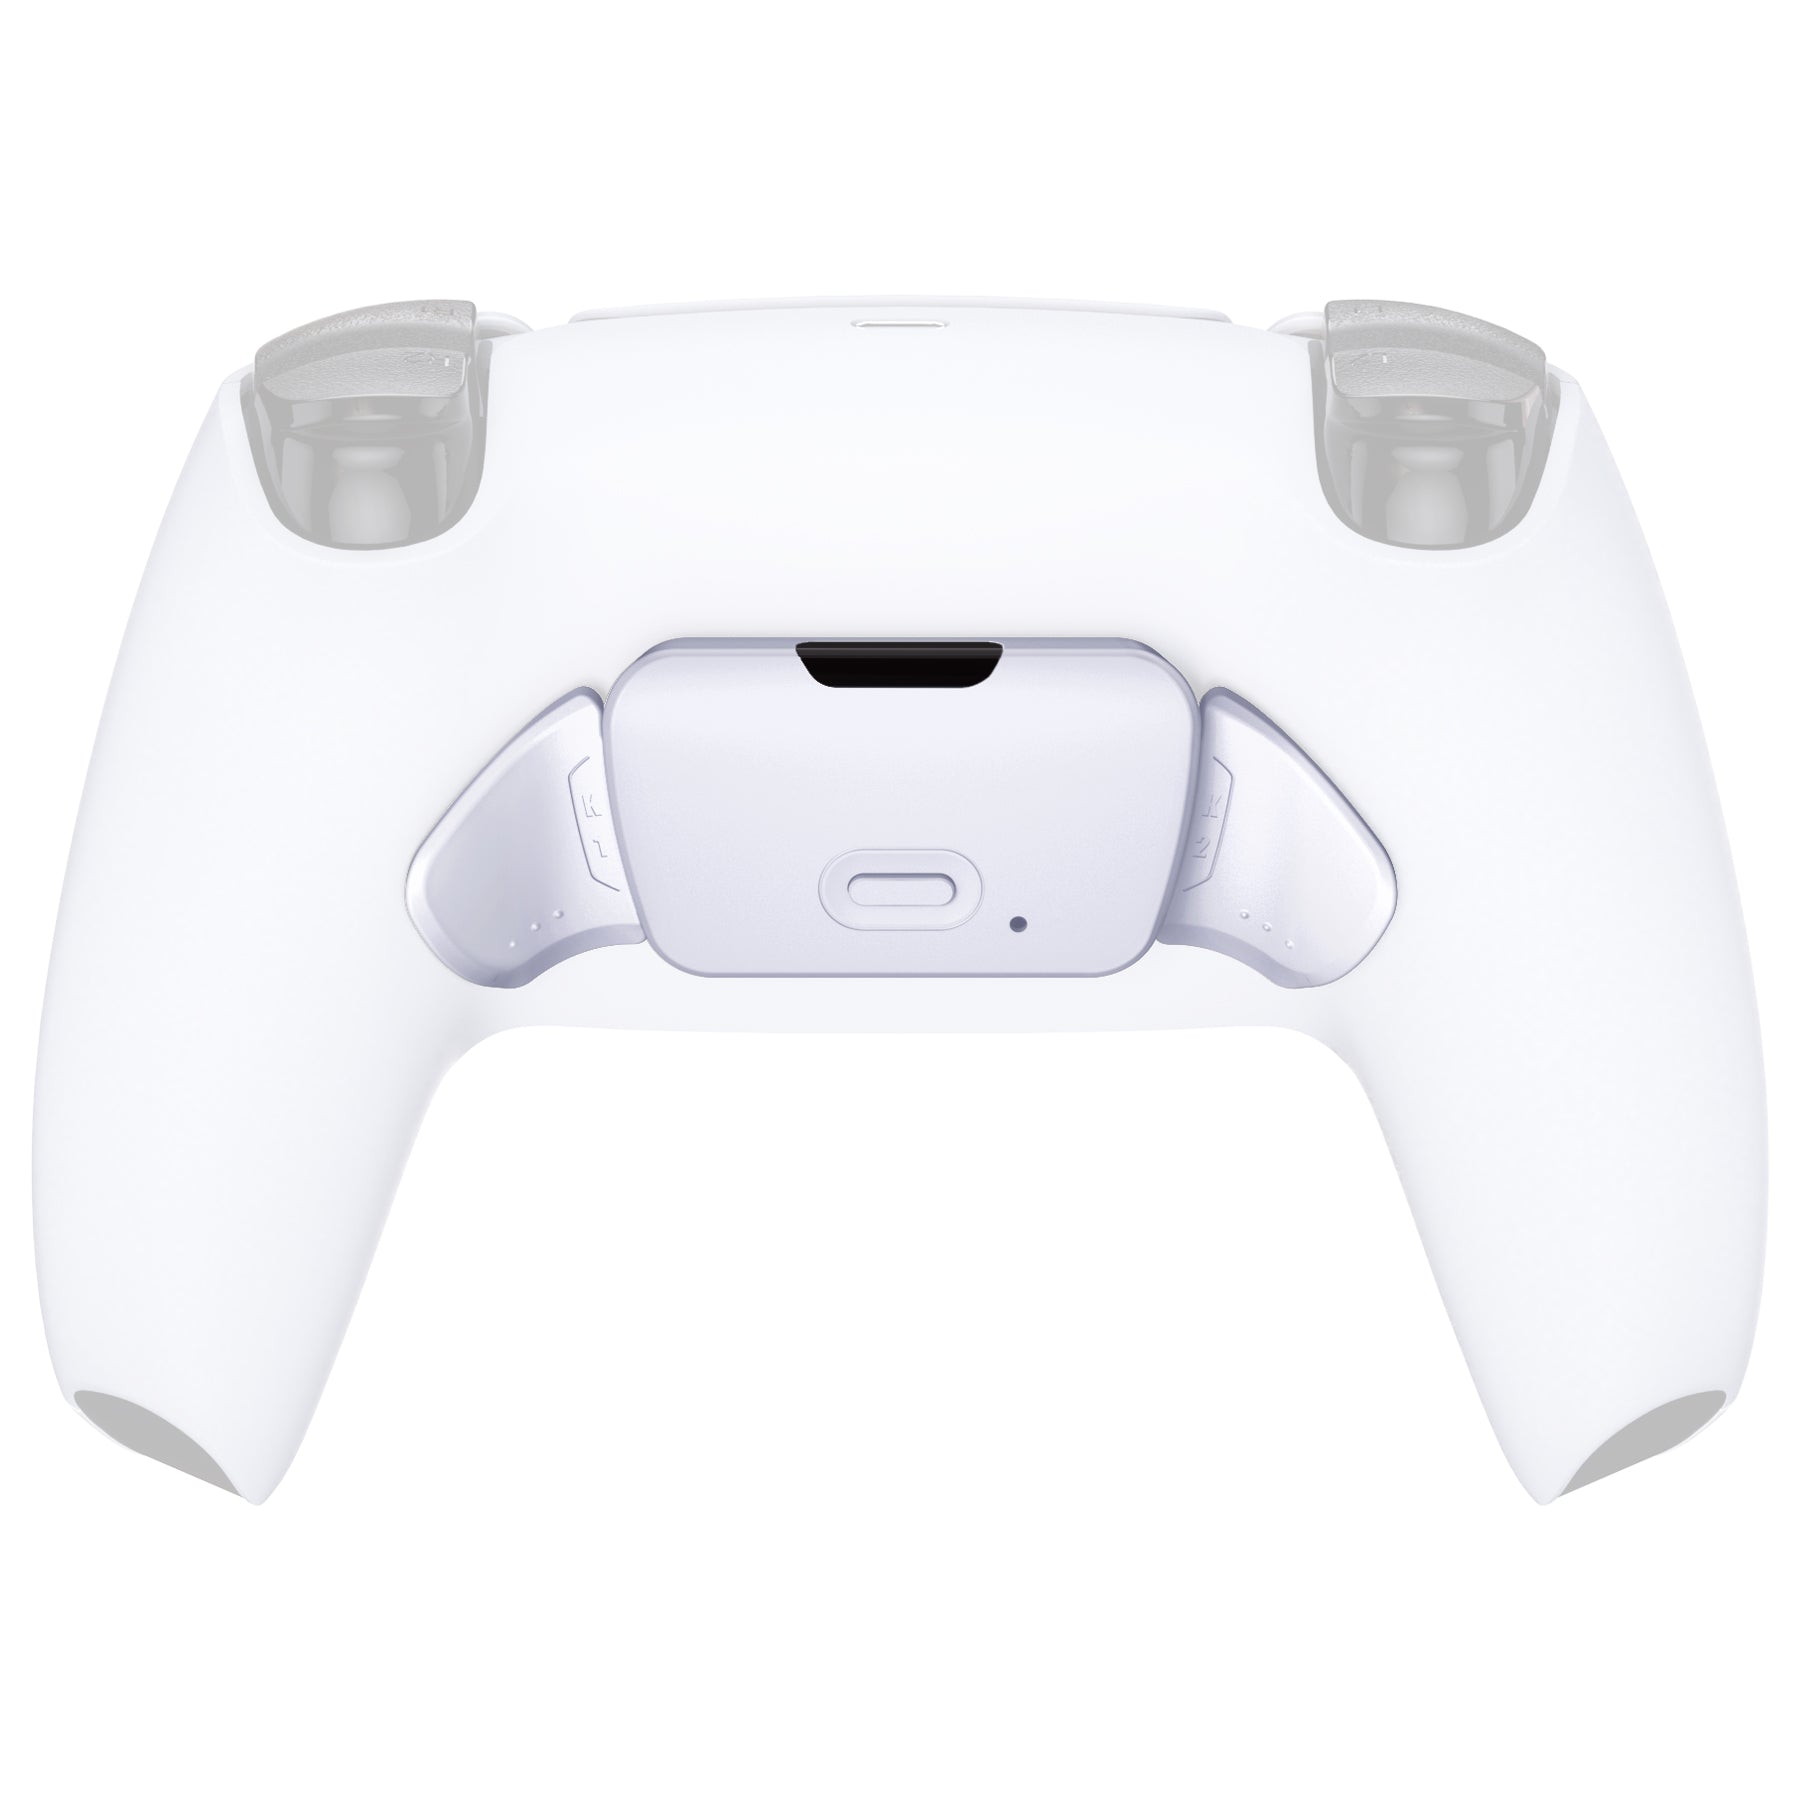 eXtremeRate Retail Solid White Replacement Redesigned K1 K2 Back Button Housing Shell for ps5 Controller eXtremerate RISE Remap Kit - Controller & RISE Remap Board NOT Included - WPFM5003